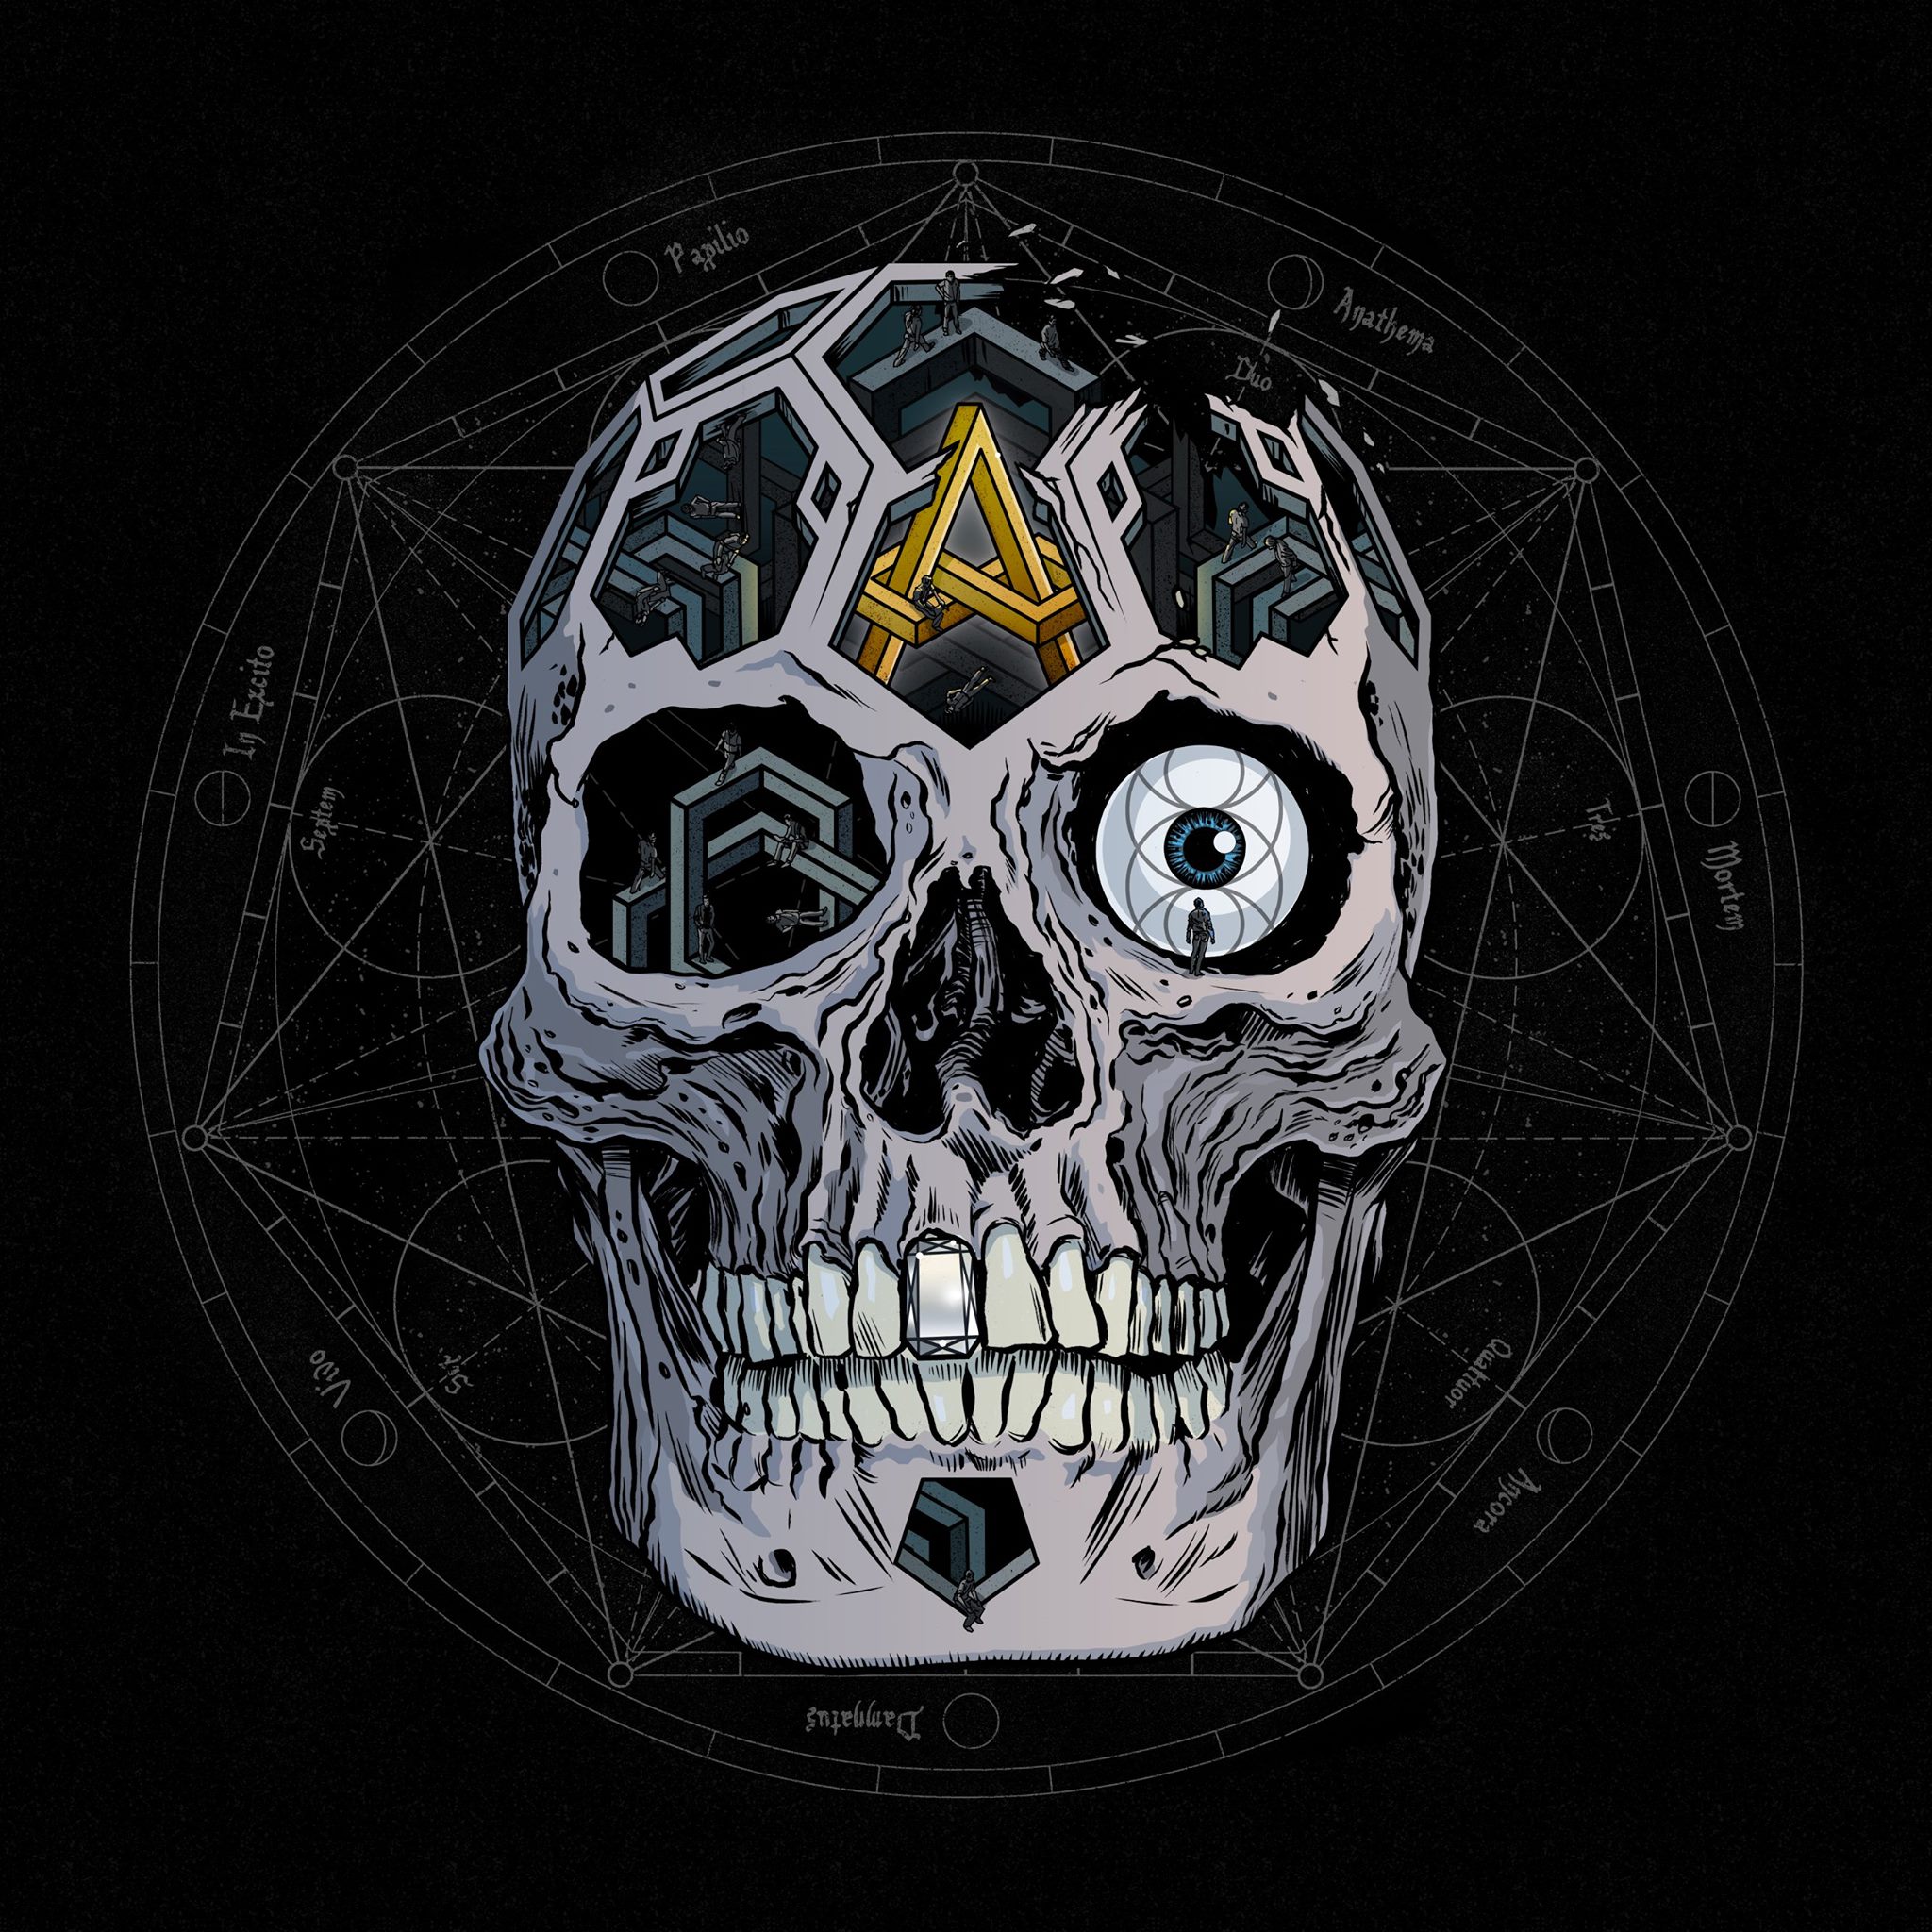 Atreyu premiere “The Time Is Now” Music Video Metal Insider